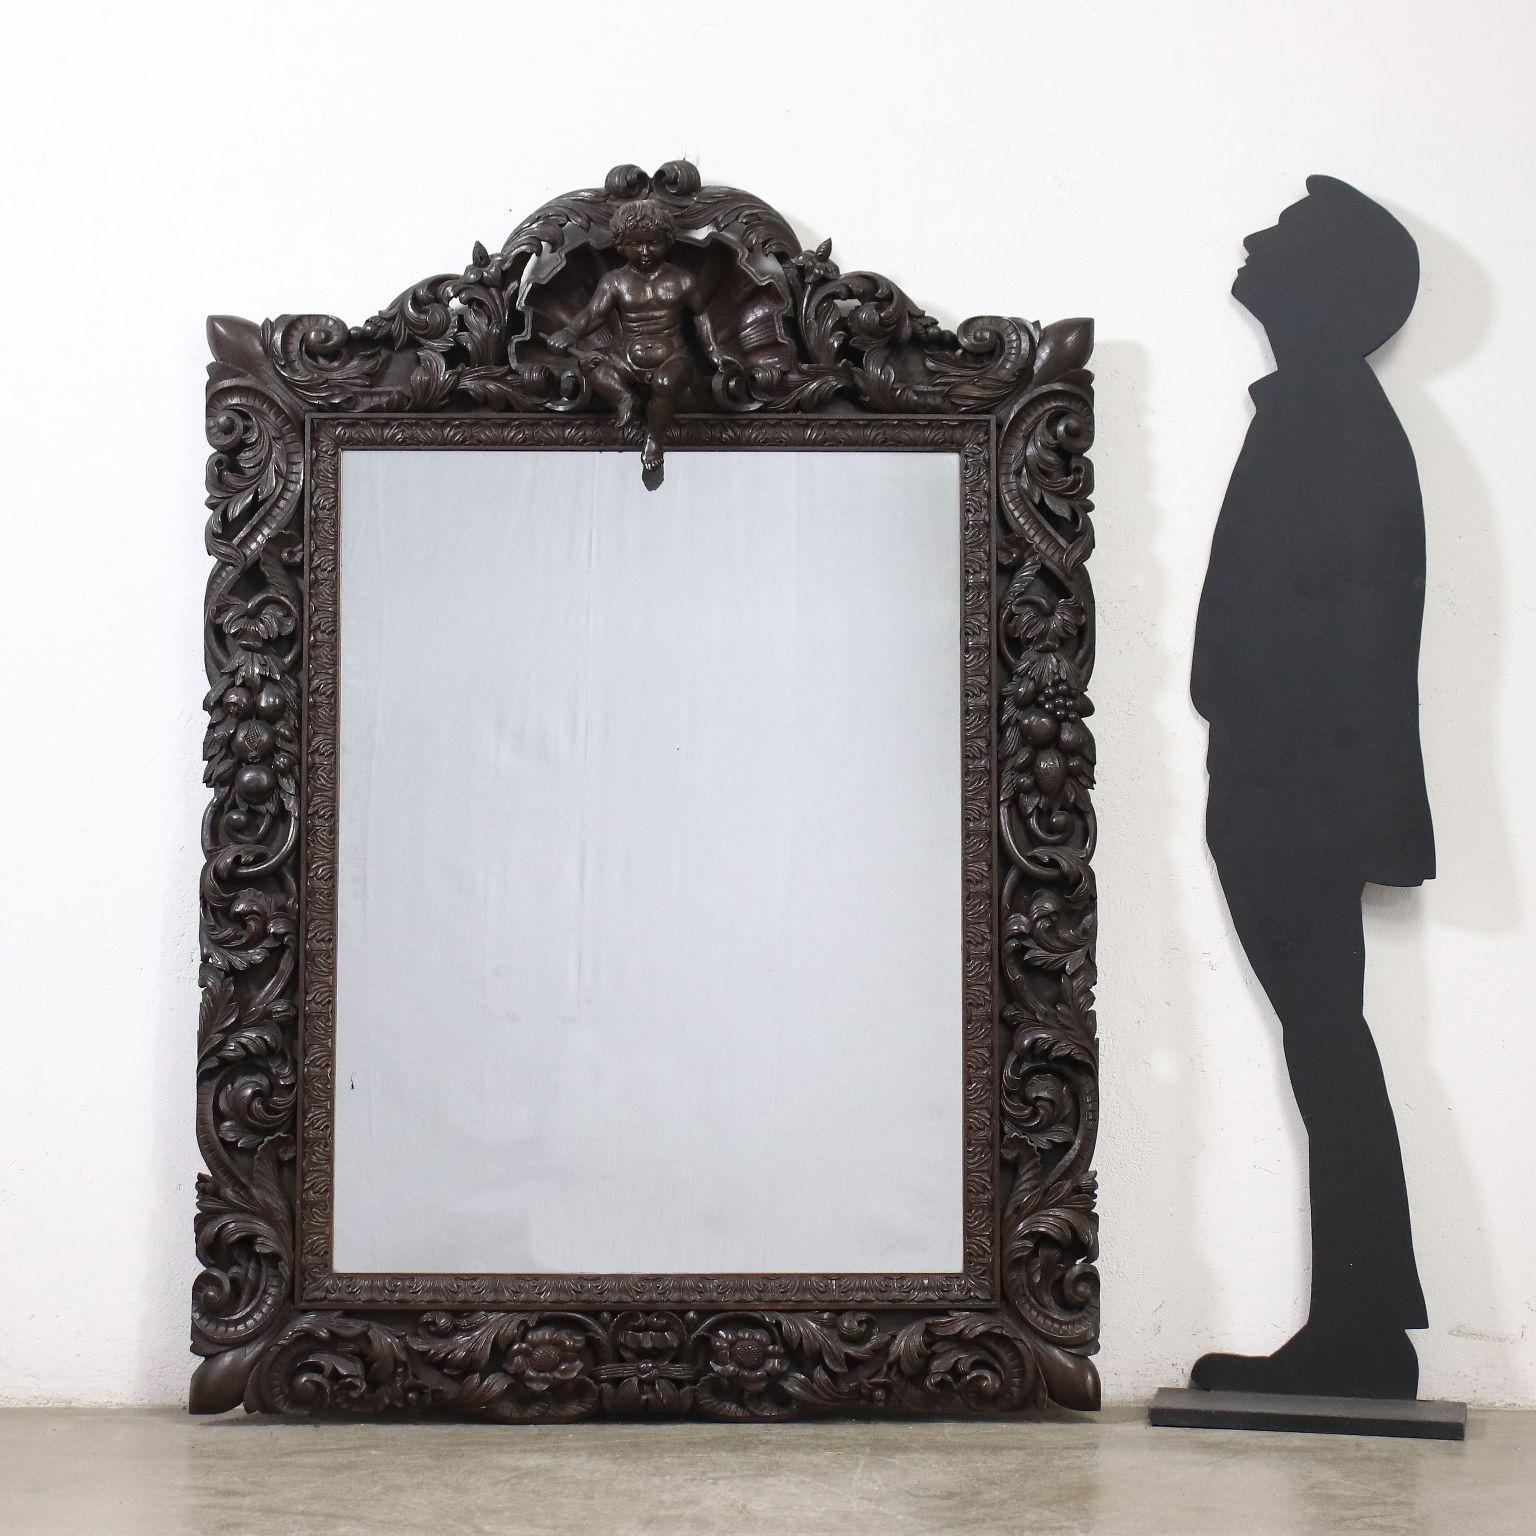 Neo-Baroque mirror, entirely carved with leafy volutes, with a shell and a putto on the frame; oak.